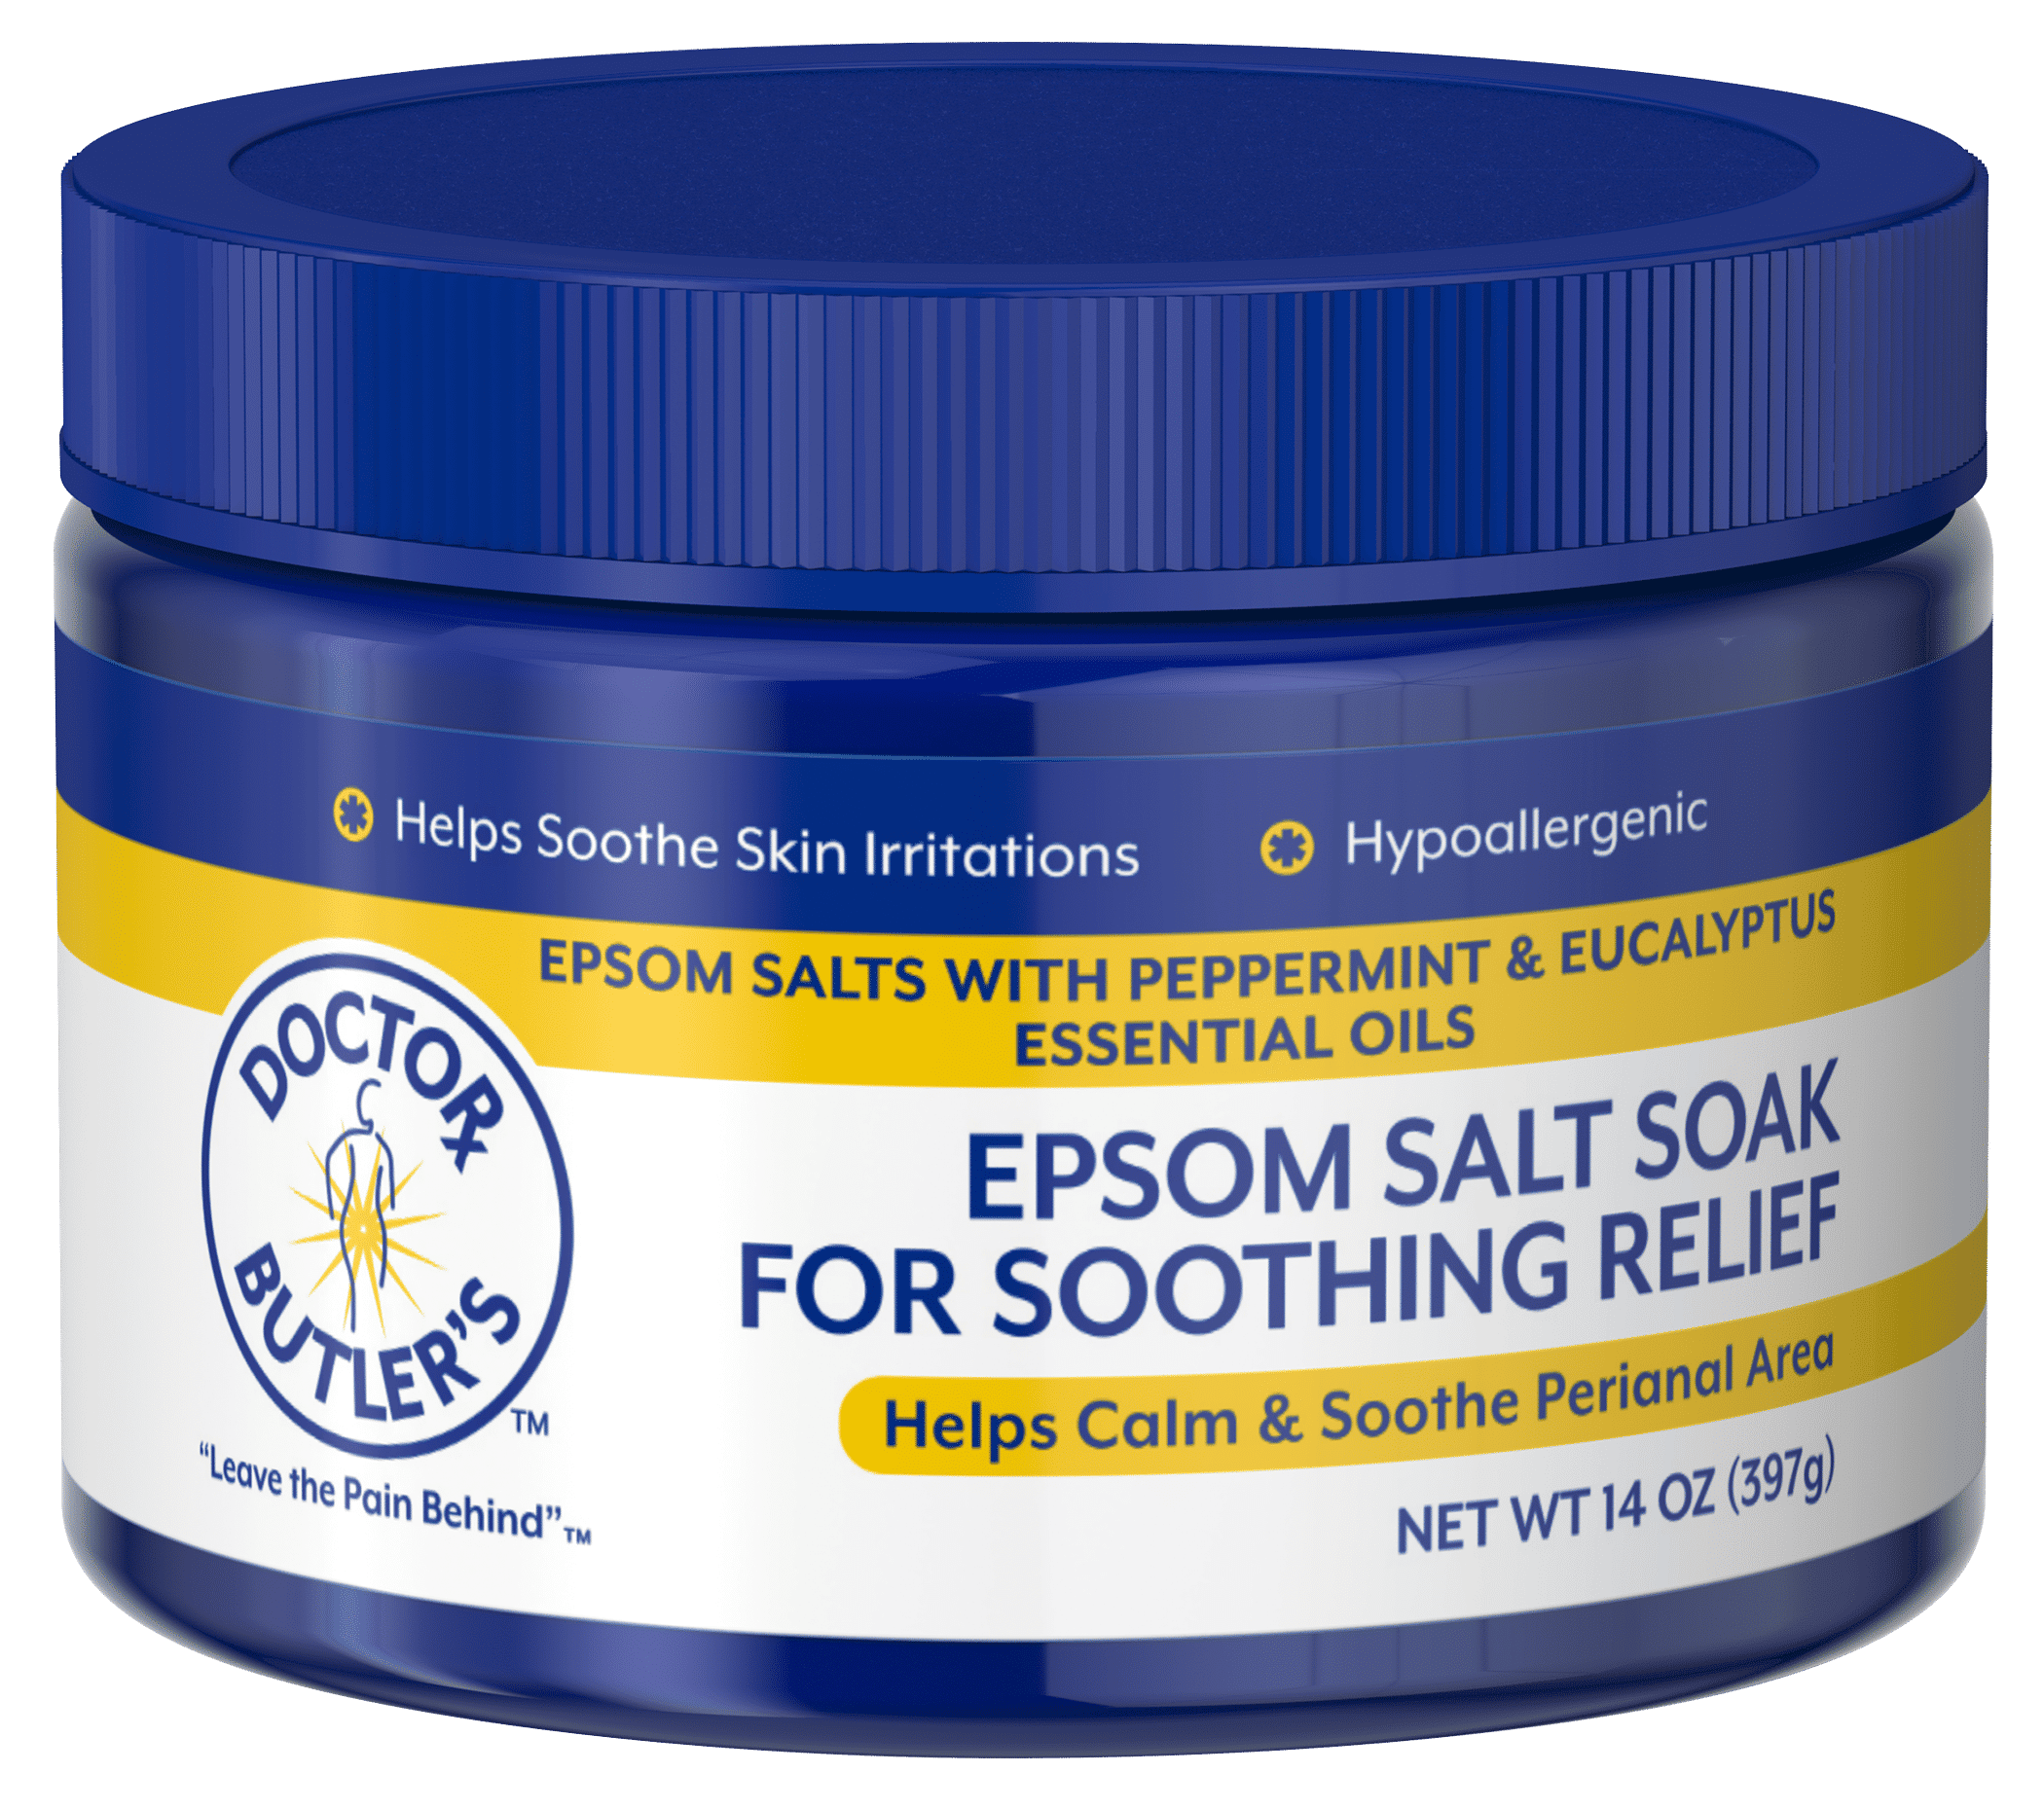 Epsom Salt for Soothing Relief